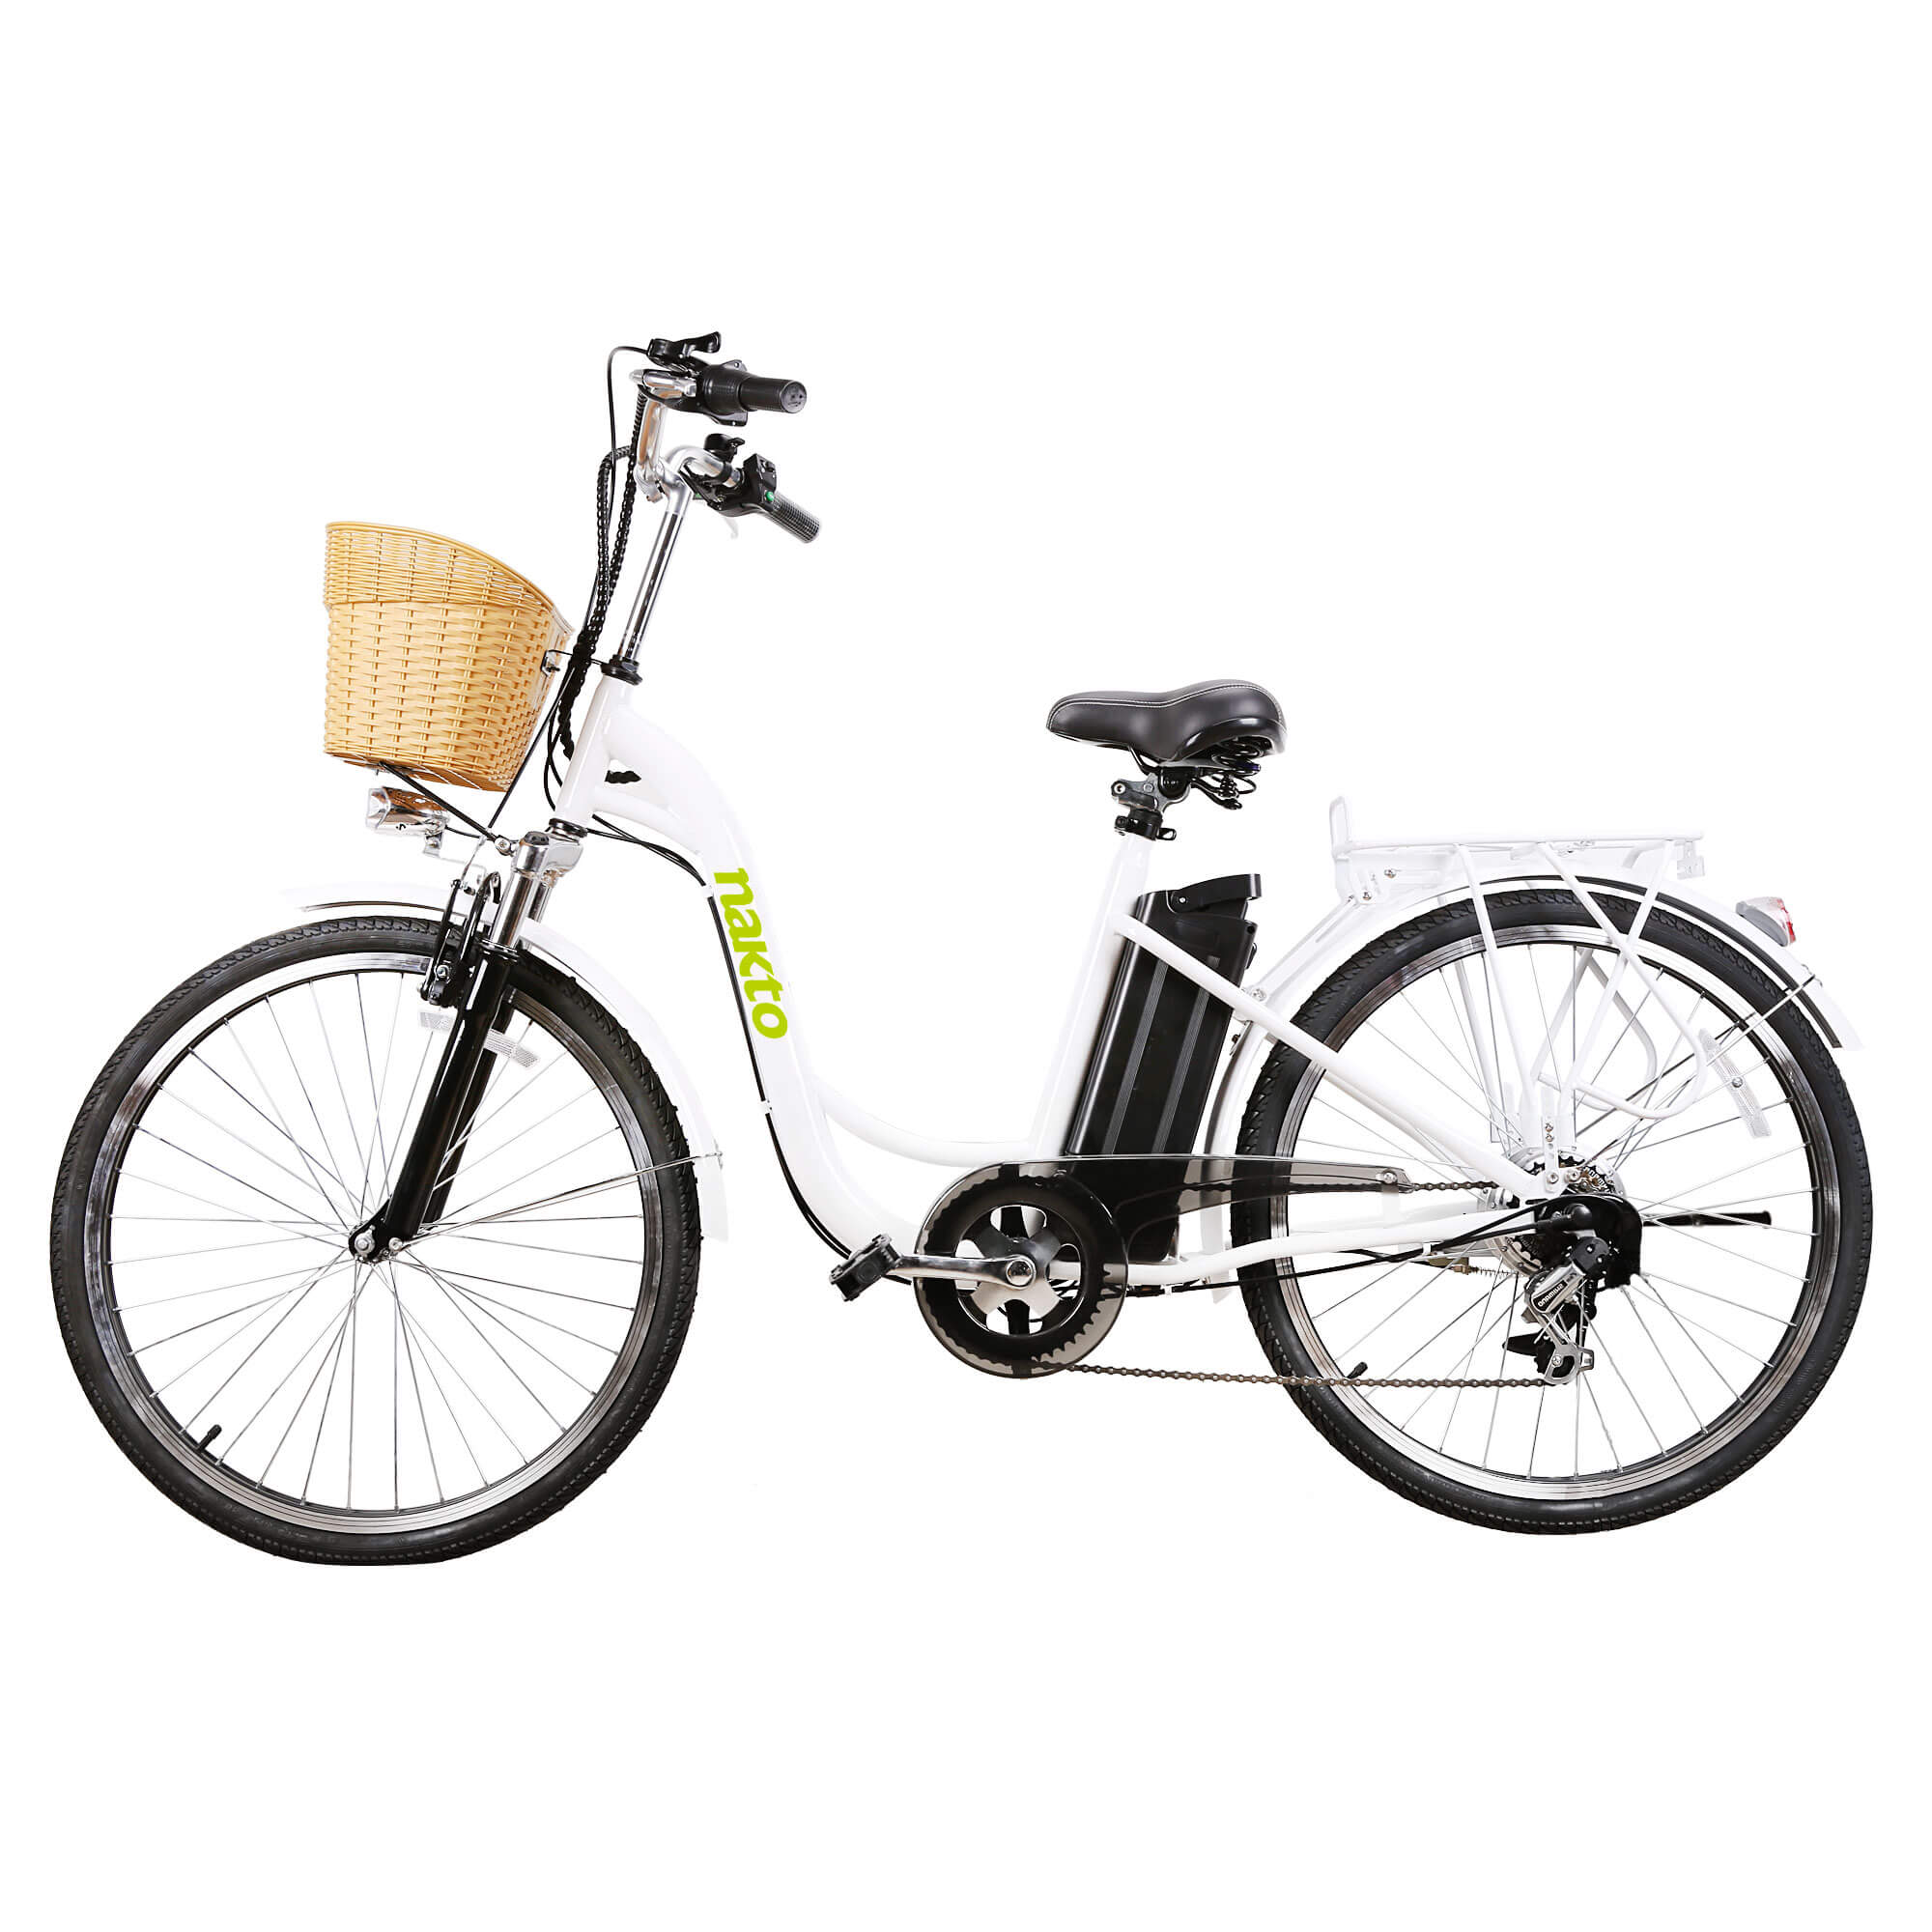 Nakto CAMEL Electric Bike for Women 6 Speed 26 inch Tire City eBike with Basket White 36V 10Ah 250W 350W Motor Electric Bicycle (1)